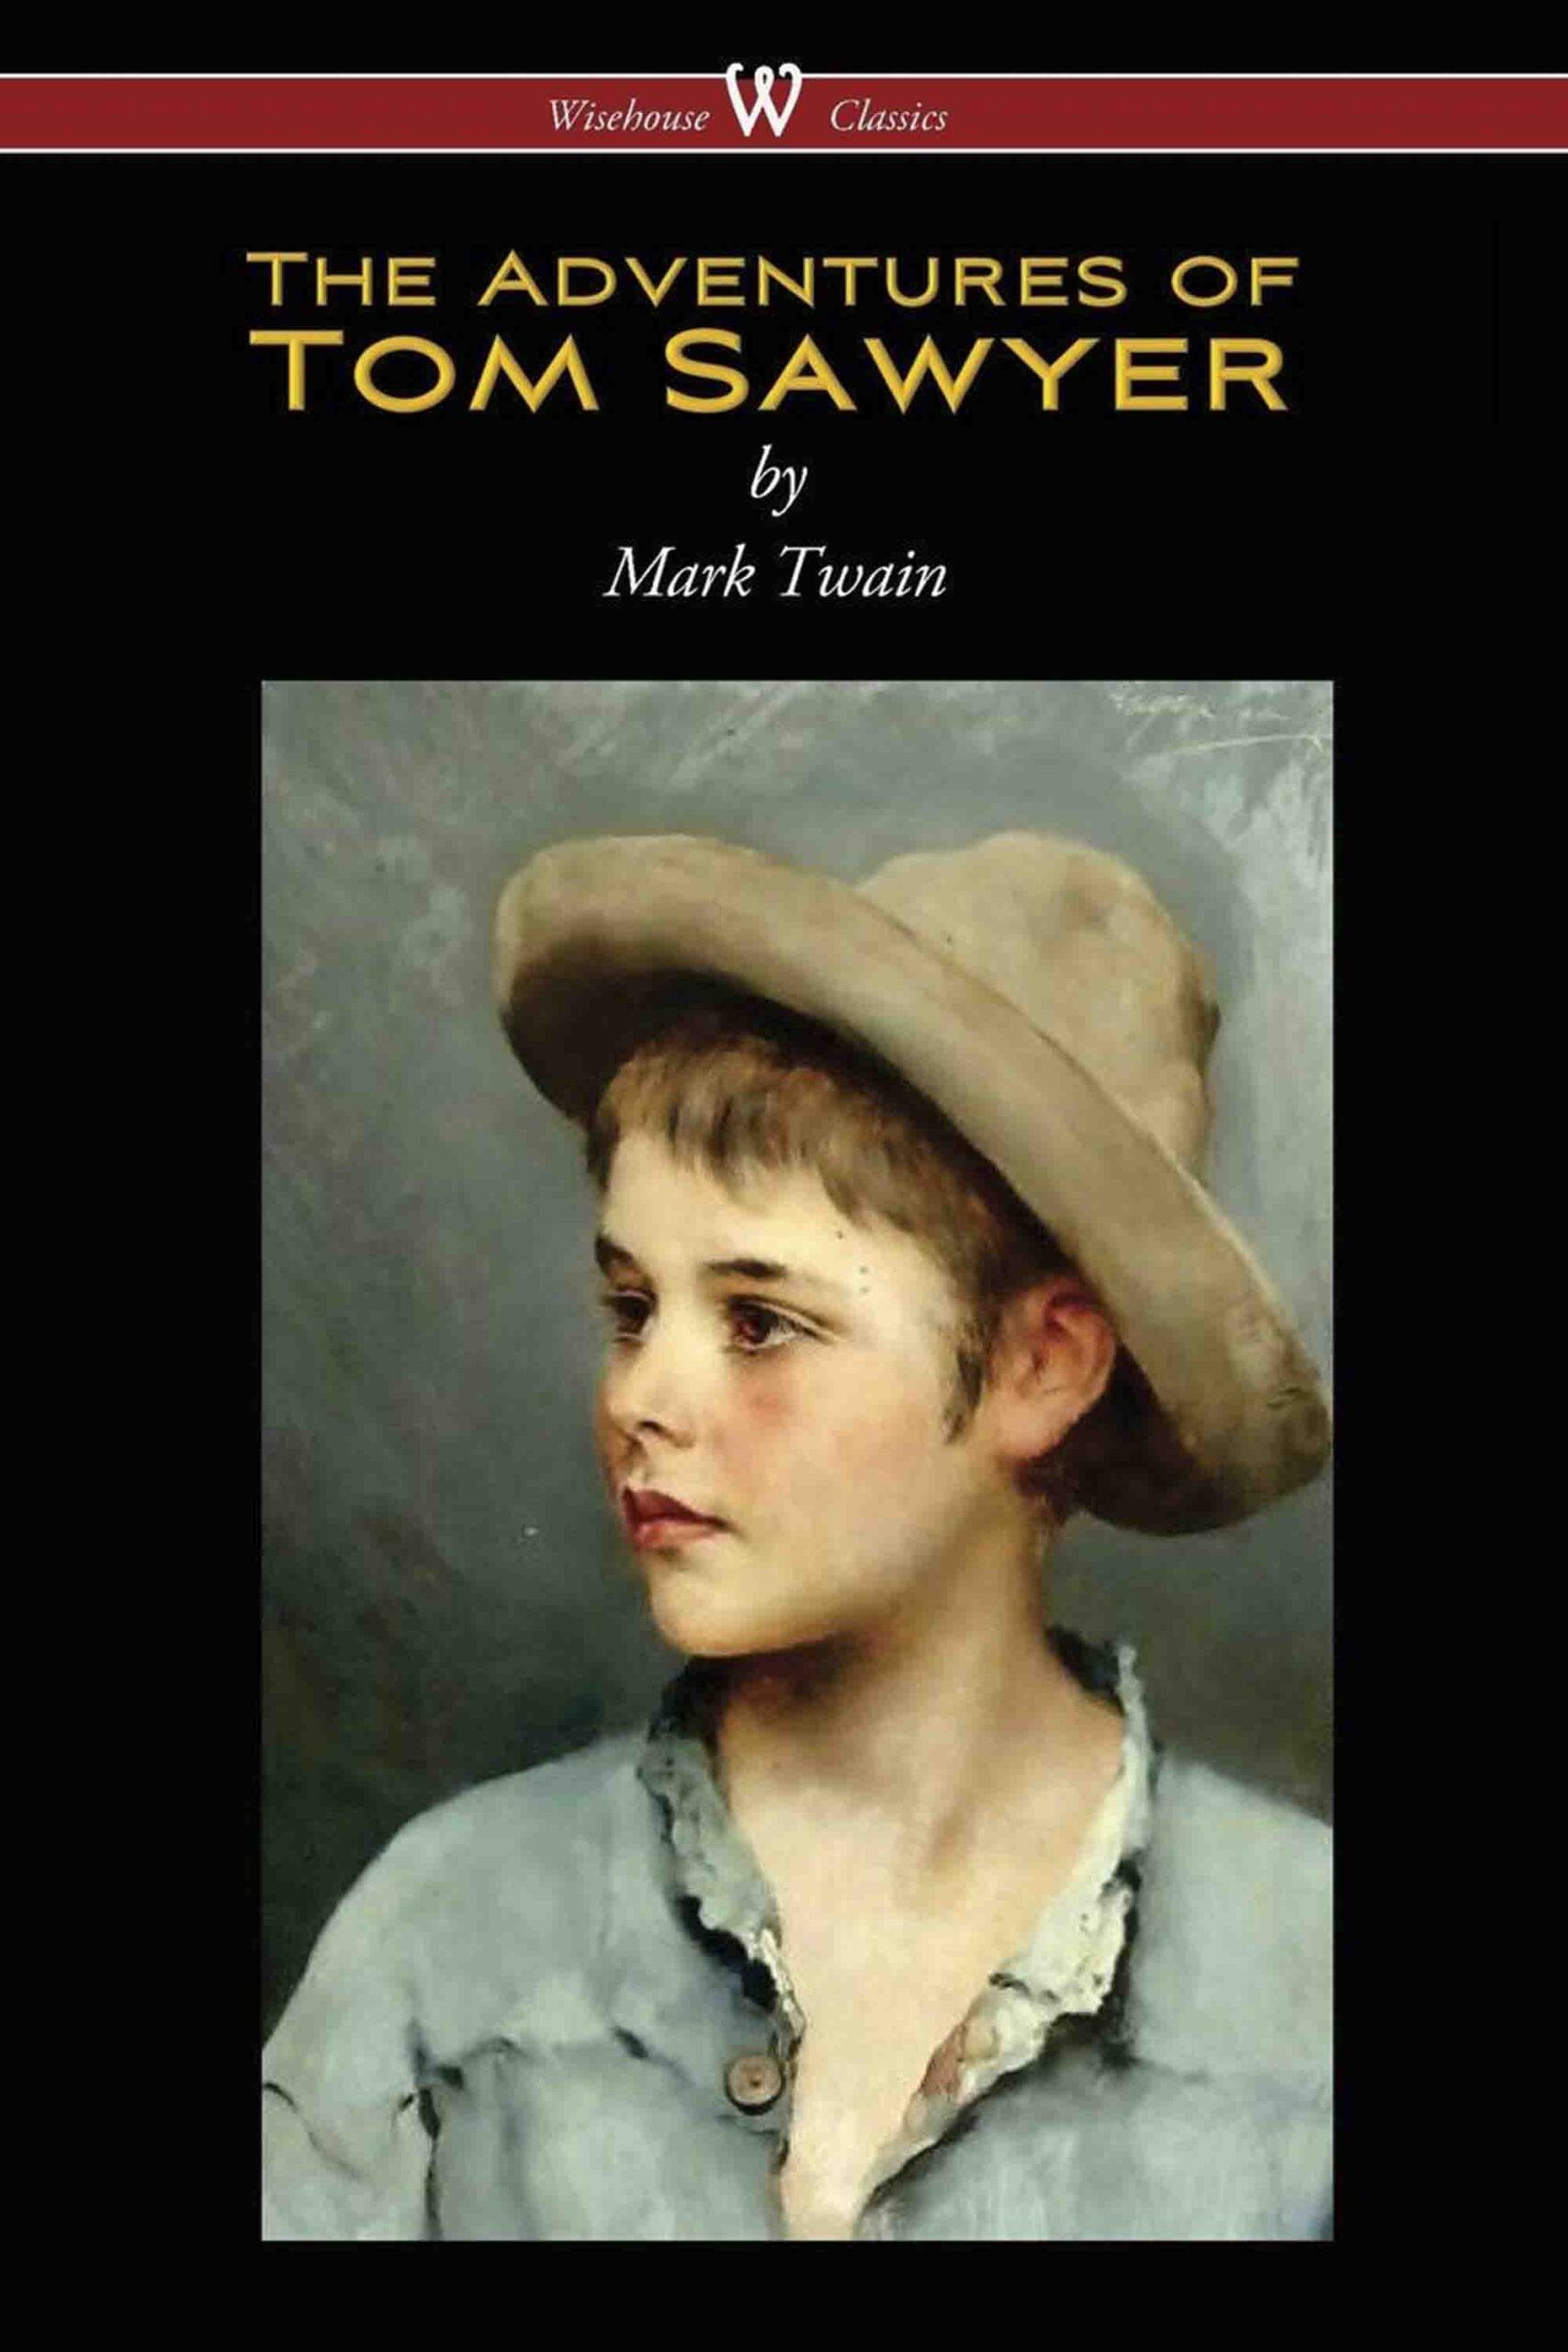 The Adventures of Tom Sawyer (Wisehouse Classics Edition)